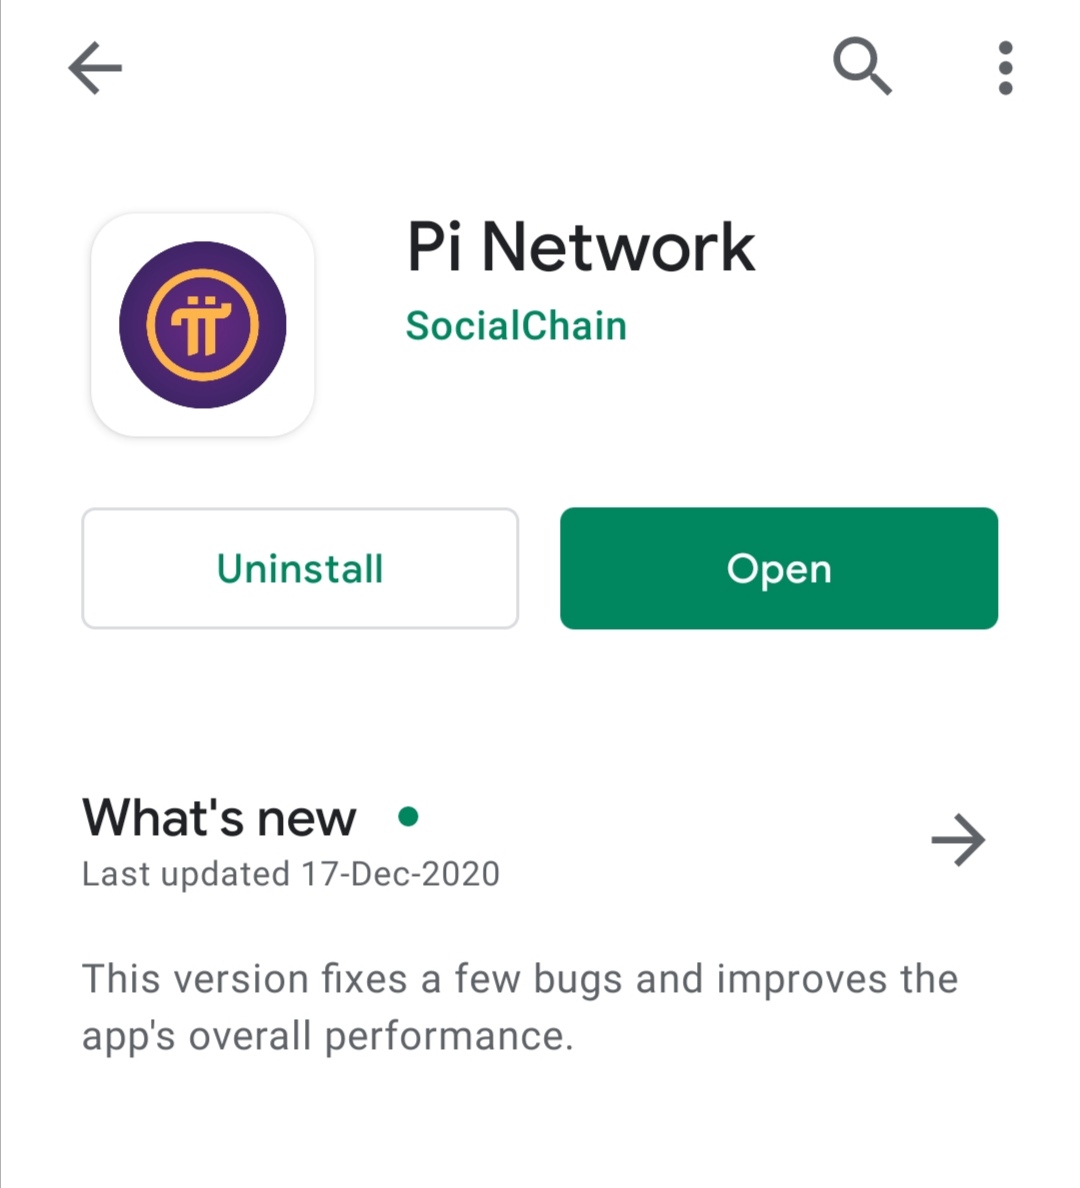 Join pi network